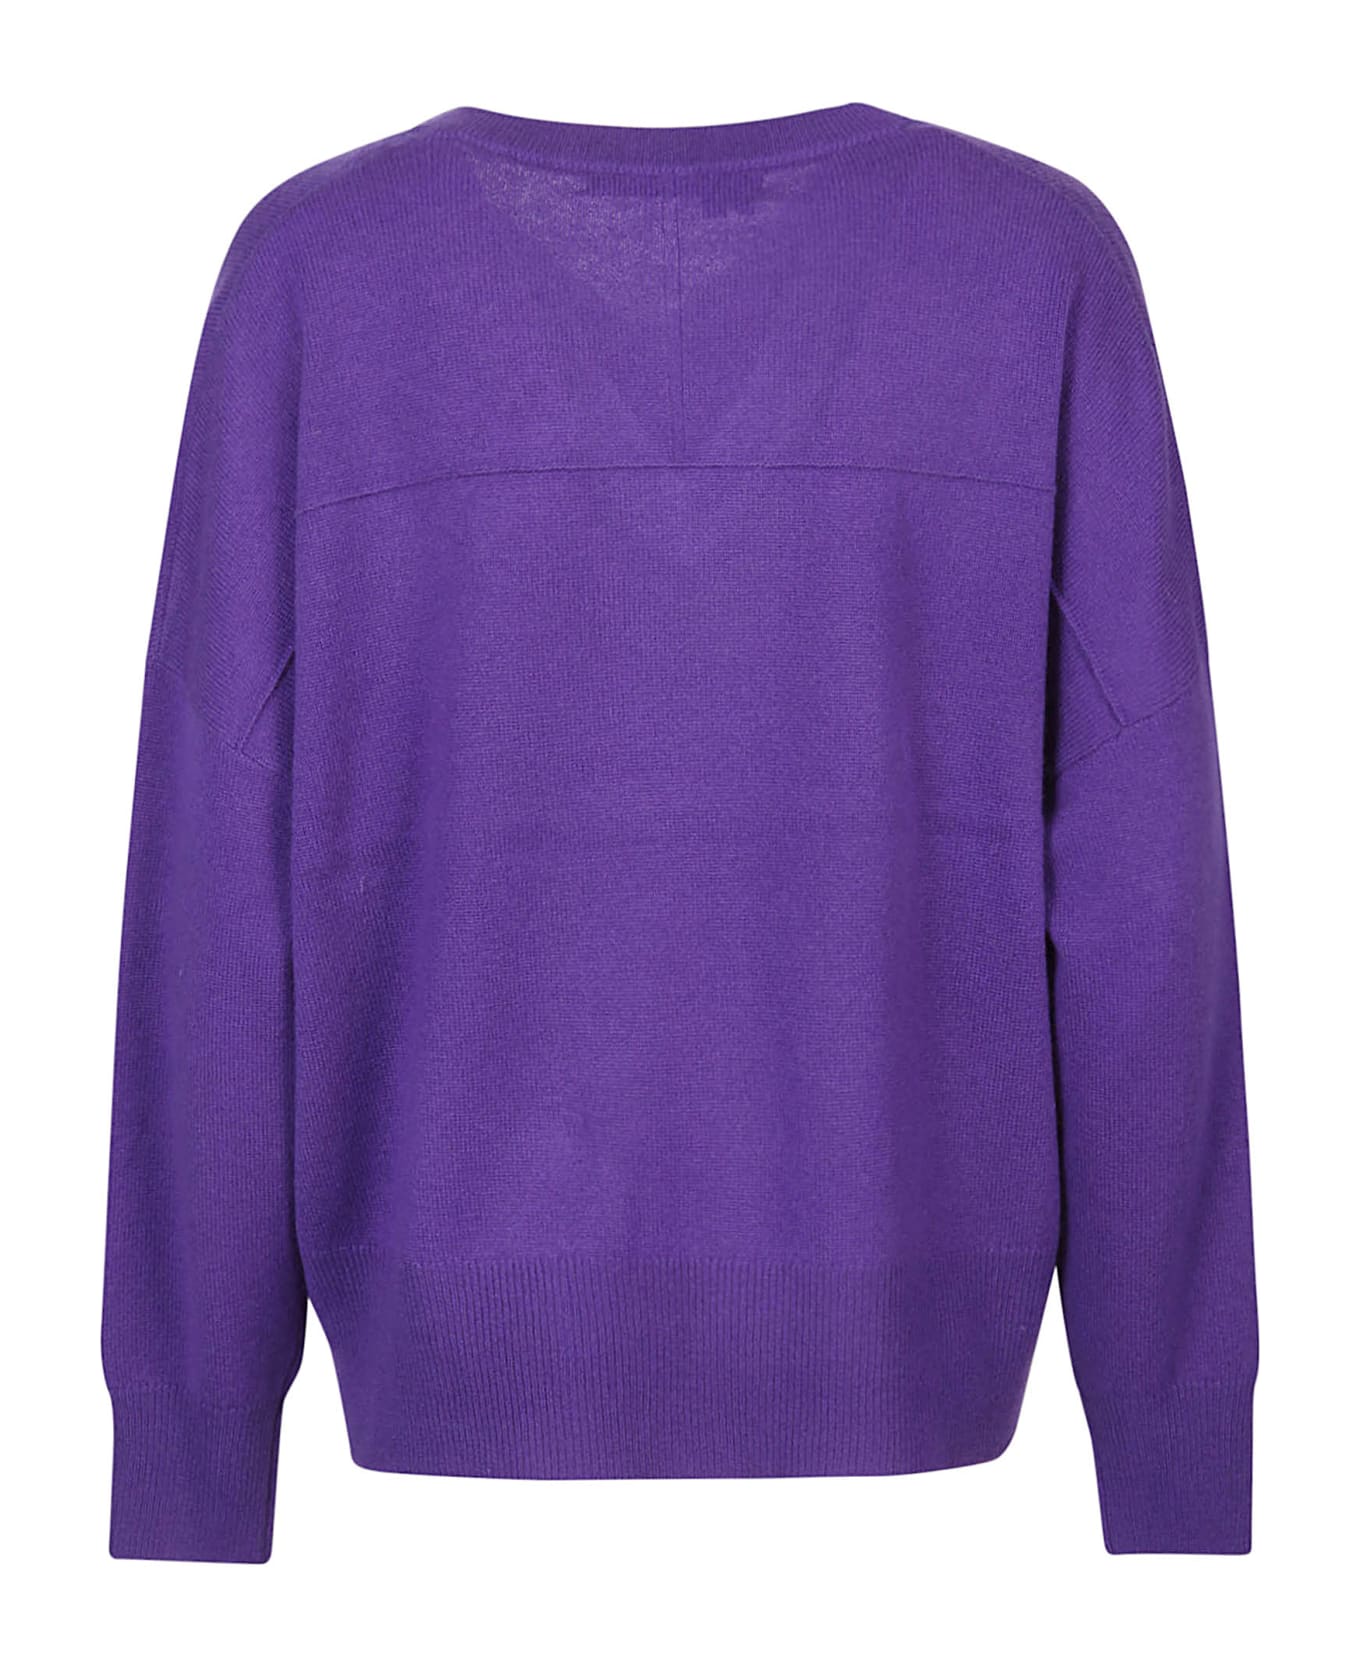 360Cashmere Camille High Low Boxy V Neck Sweater - Amethyst